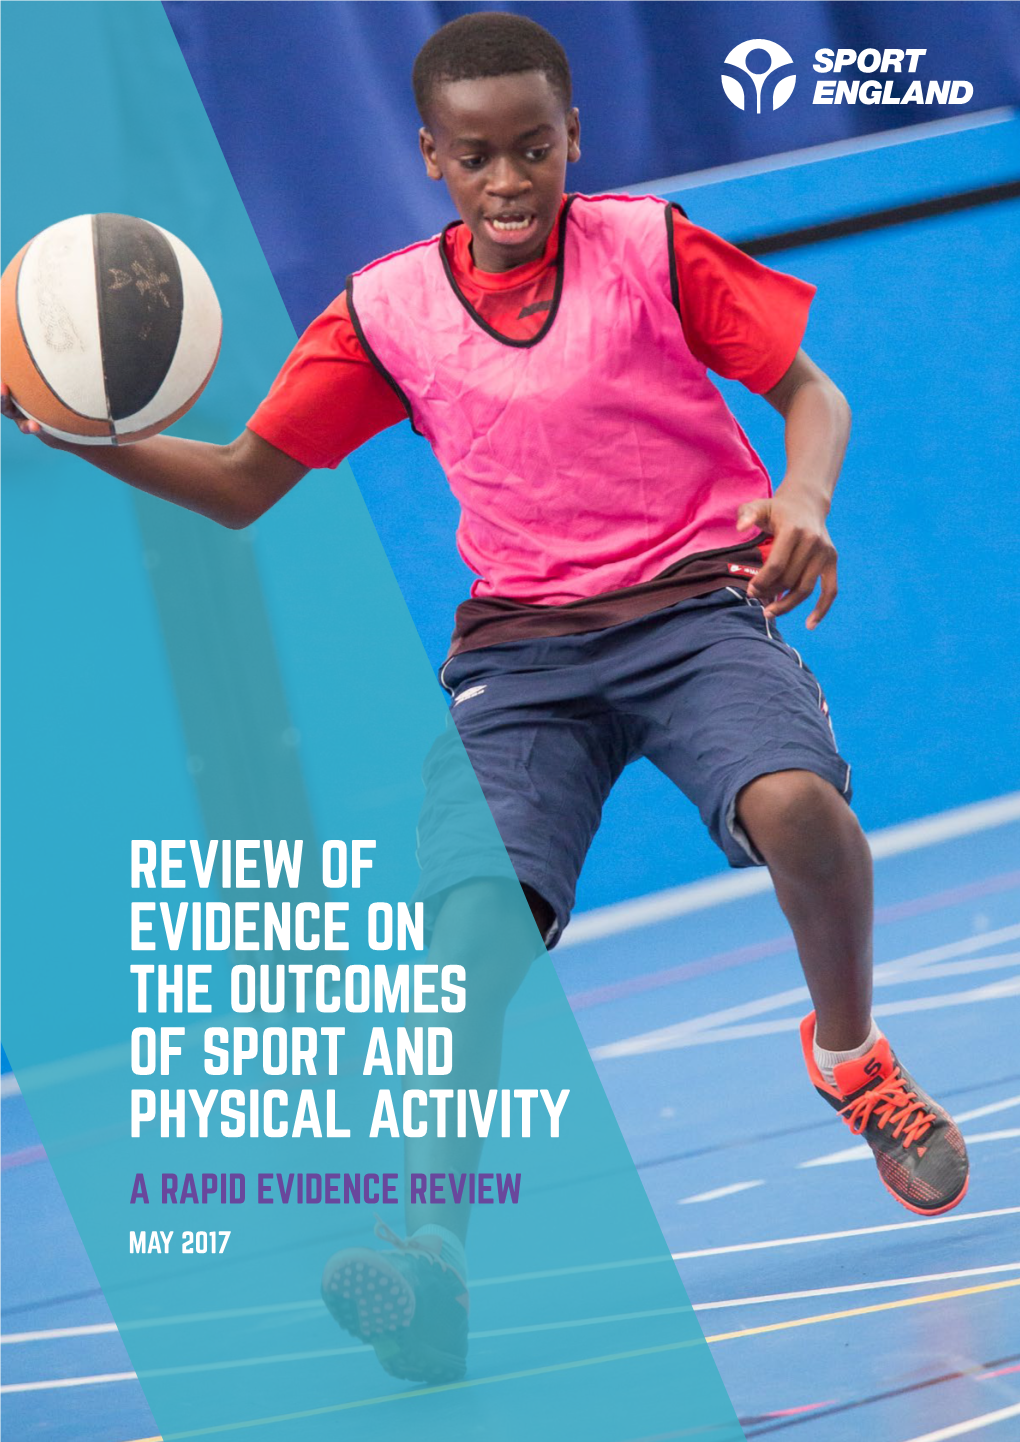 Review of Evidence on the Outcomes of Sport and Physical Activity